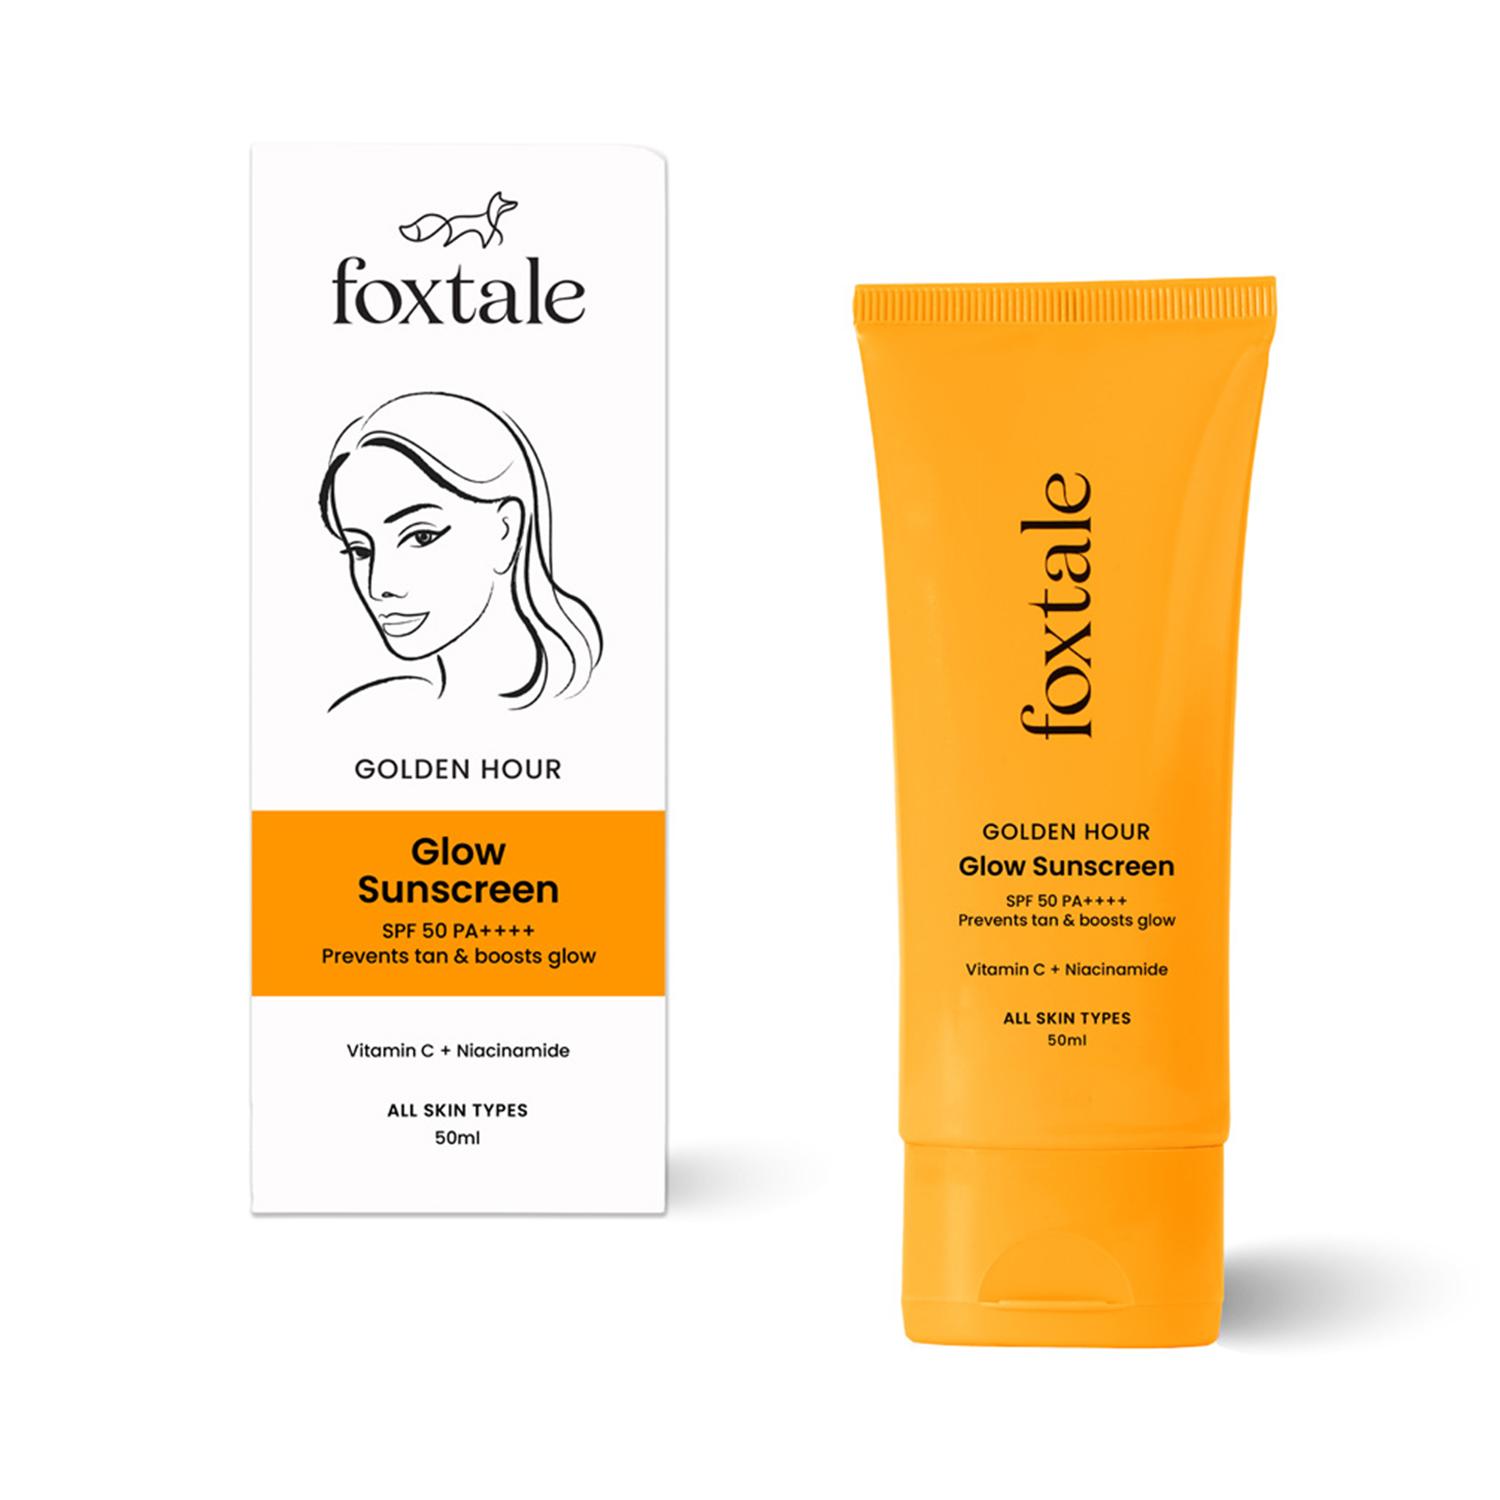 Foxtale | Foxtale Essentials Brightening Spf 50 Sunscreen with Vitamin C and Niacinamide (50ml)